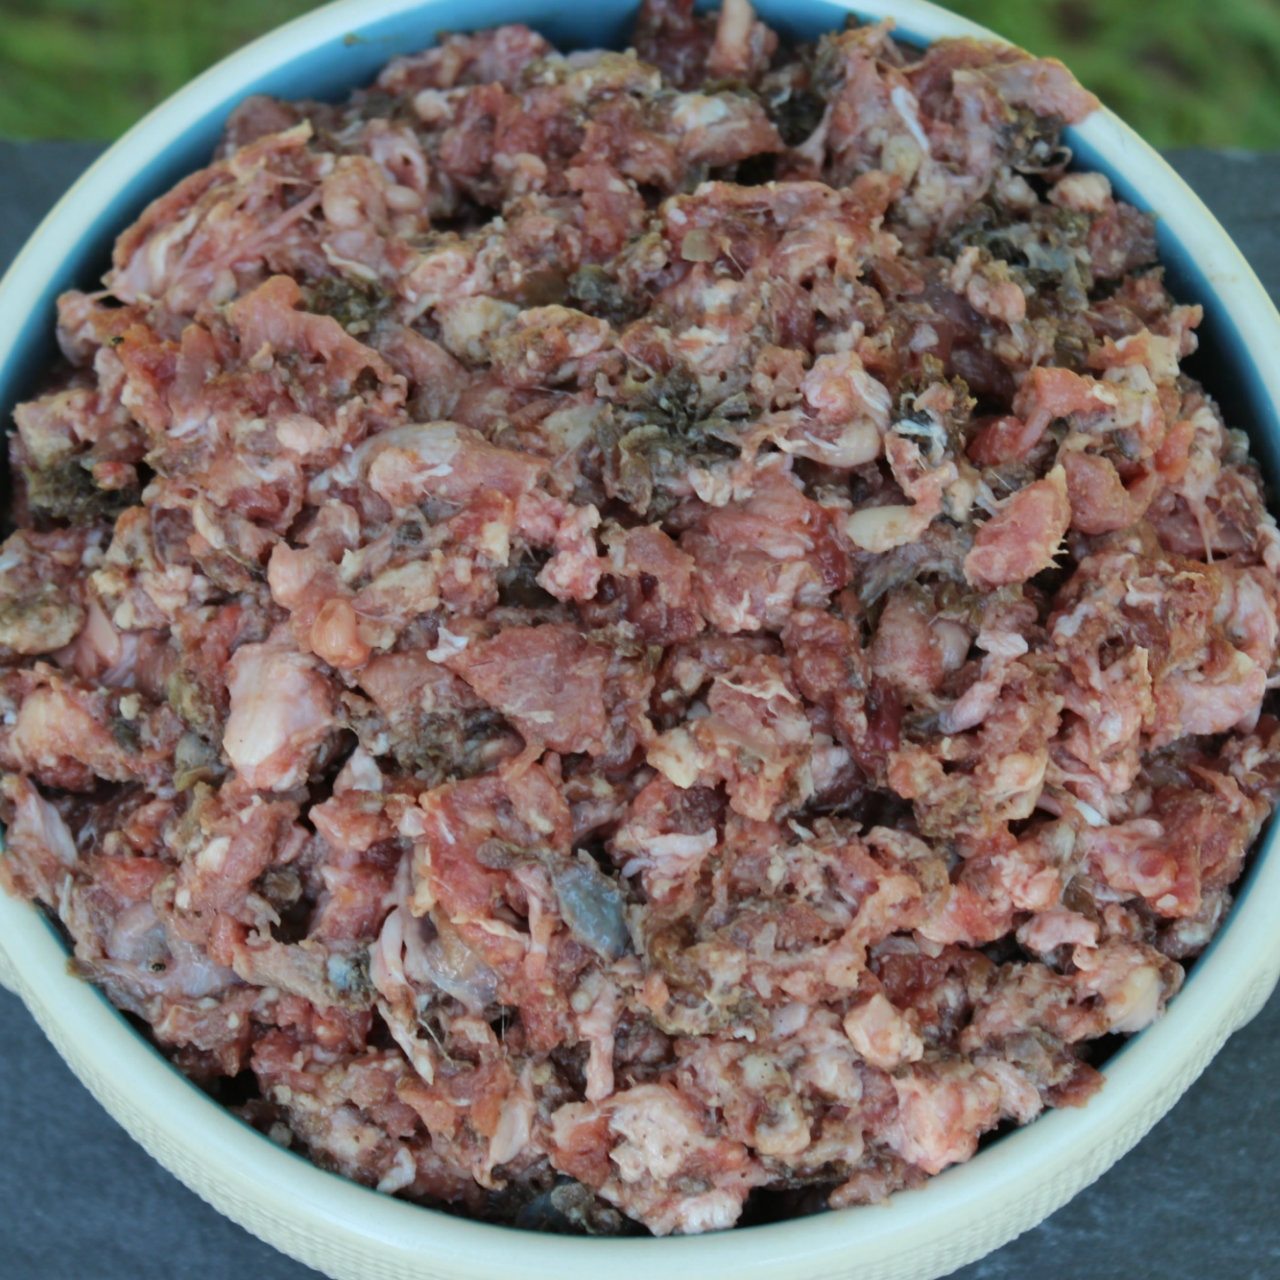 Nutritious and delicious Beef and Turkey Mix all-natural raw dog food from Raw K9